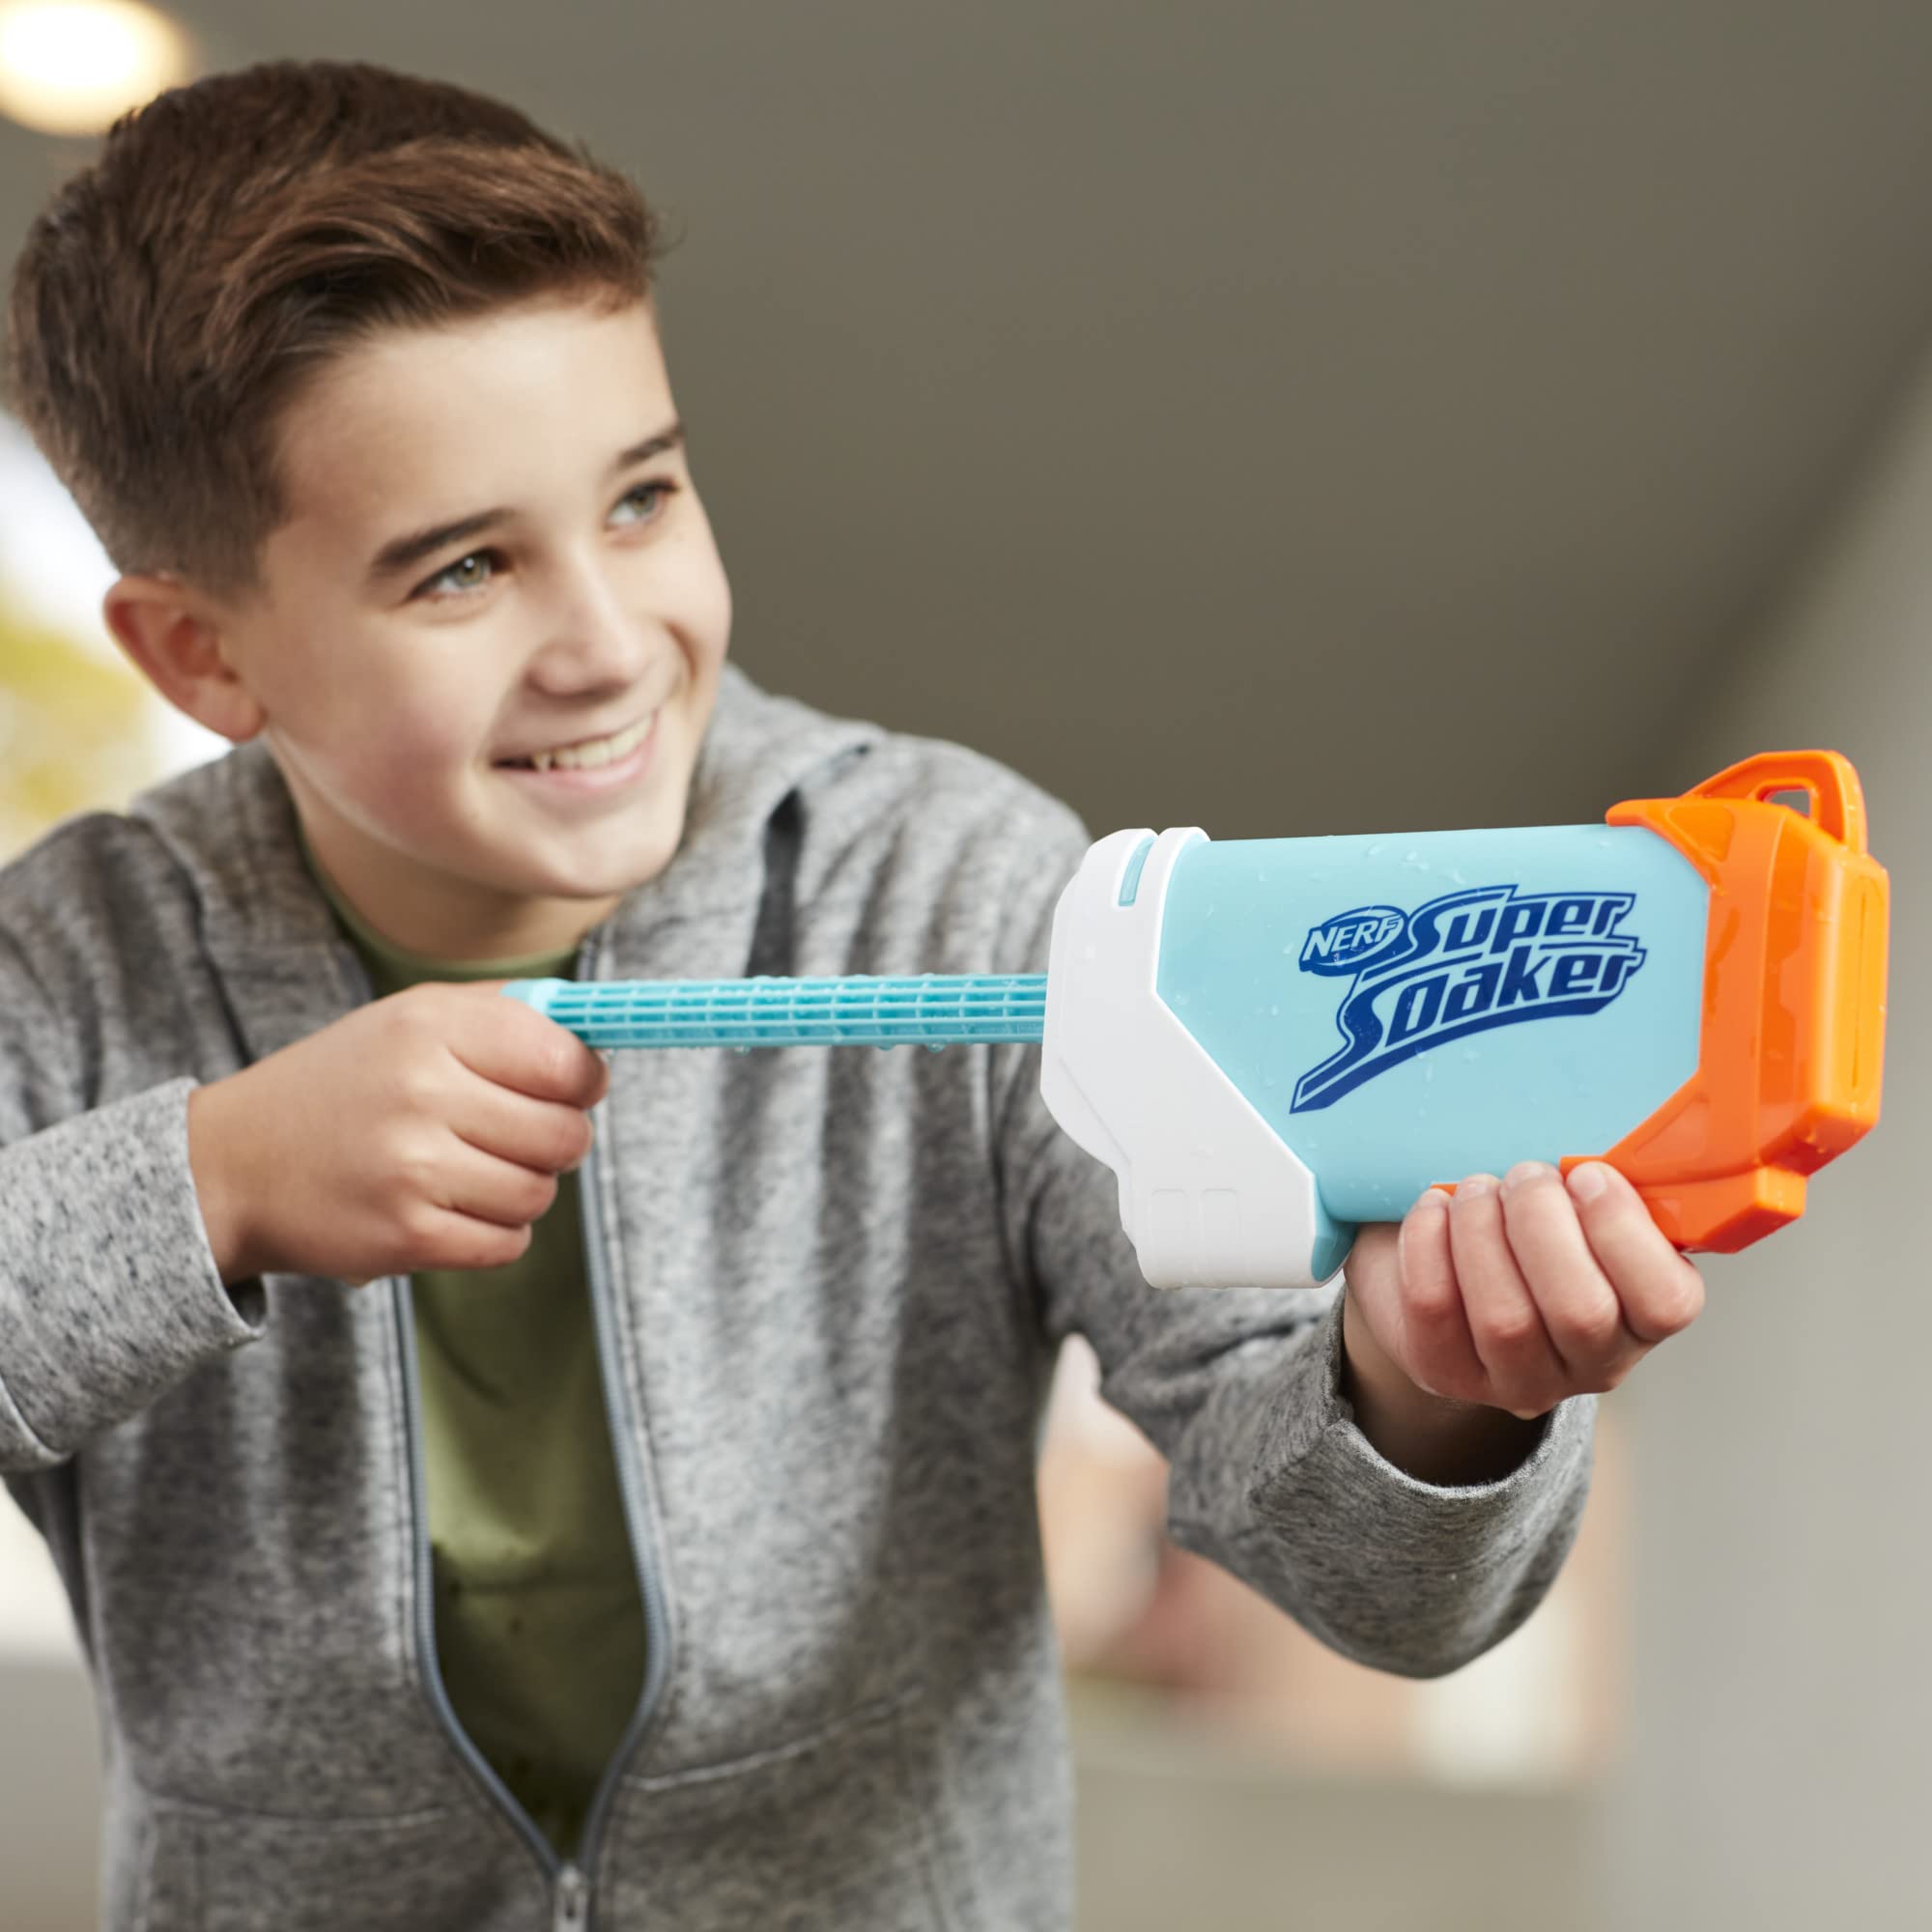 Nerf Super Soaker Torrent Water Blaster, Pump to Fire a Flooding Blast of Water, Outdoor Water-Blasting Fun for Kids Teens Adults